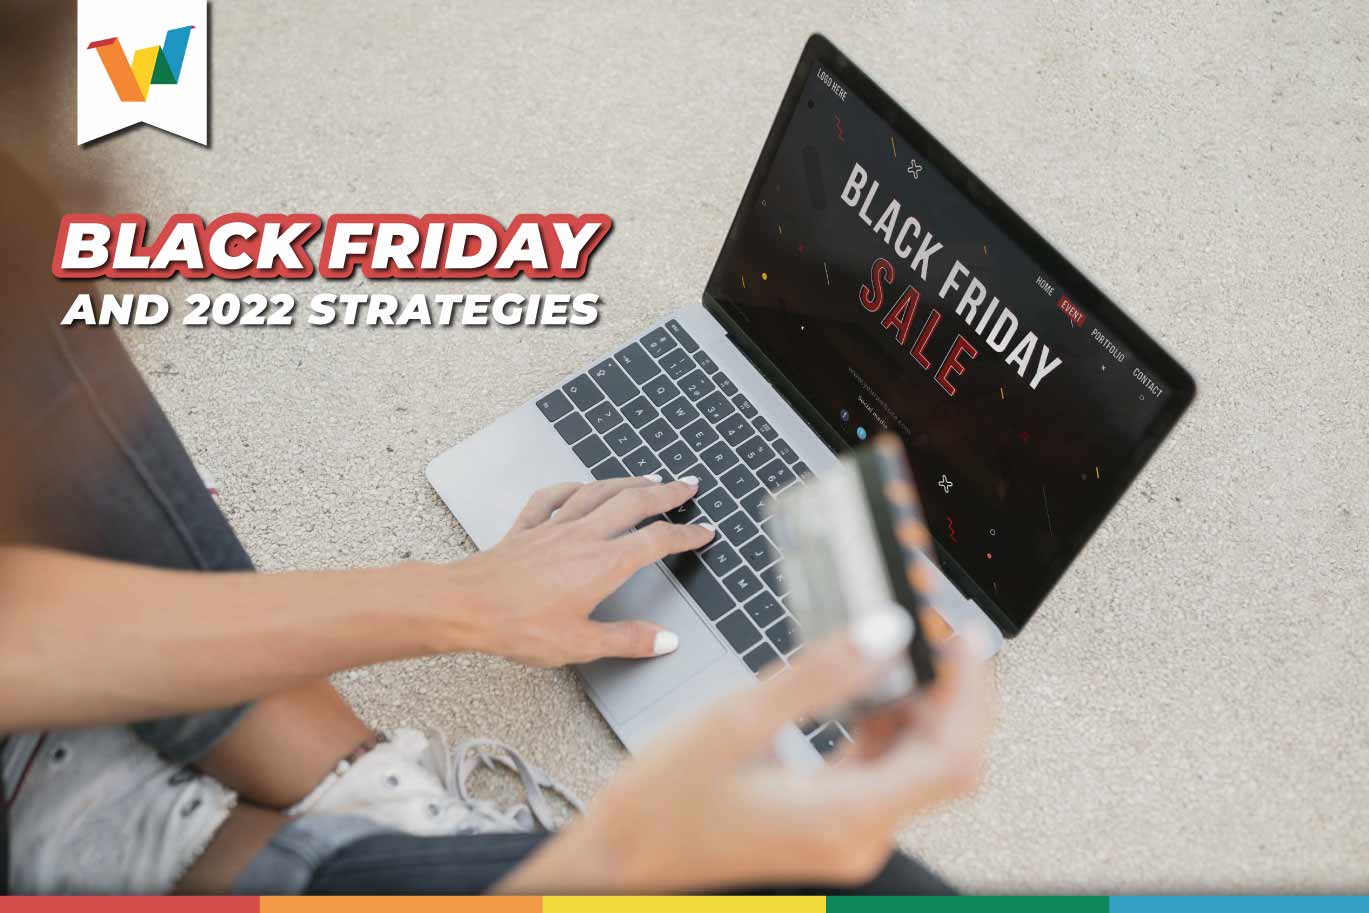 Black Friday and 2022 strategies